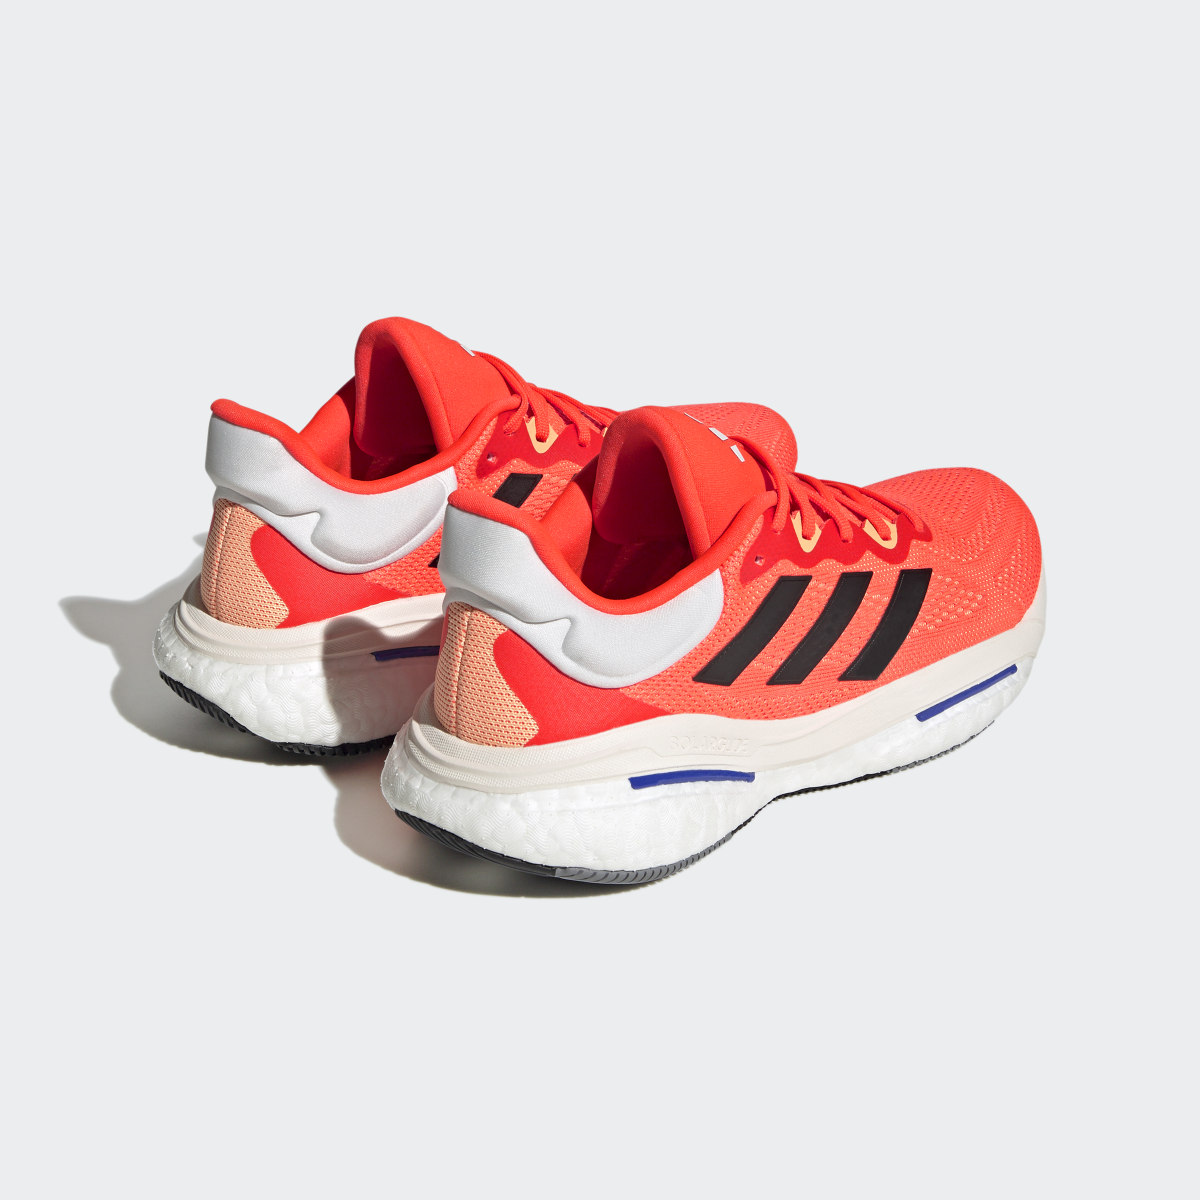 Adidas SOLARGLIDE 6 Shoes. 6